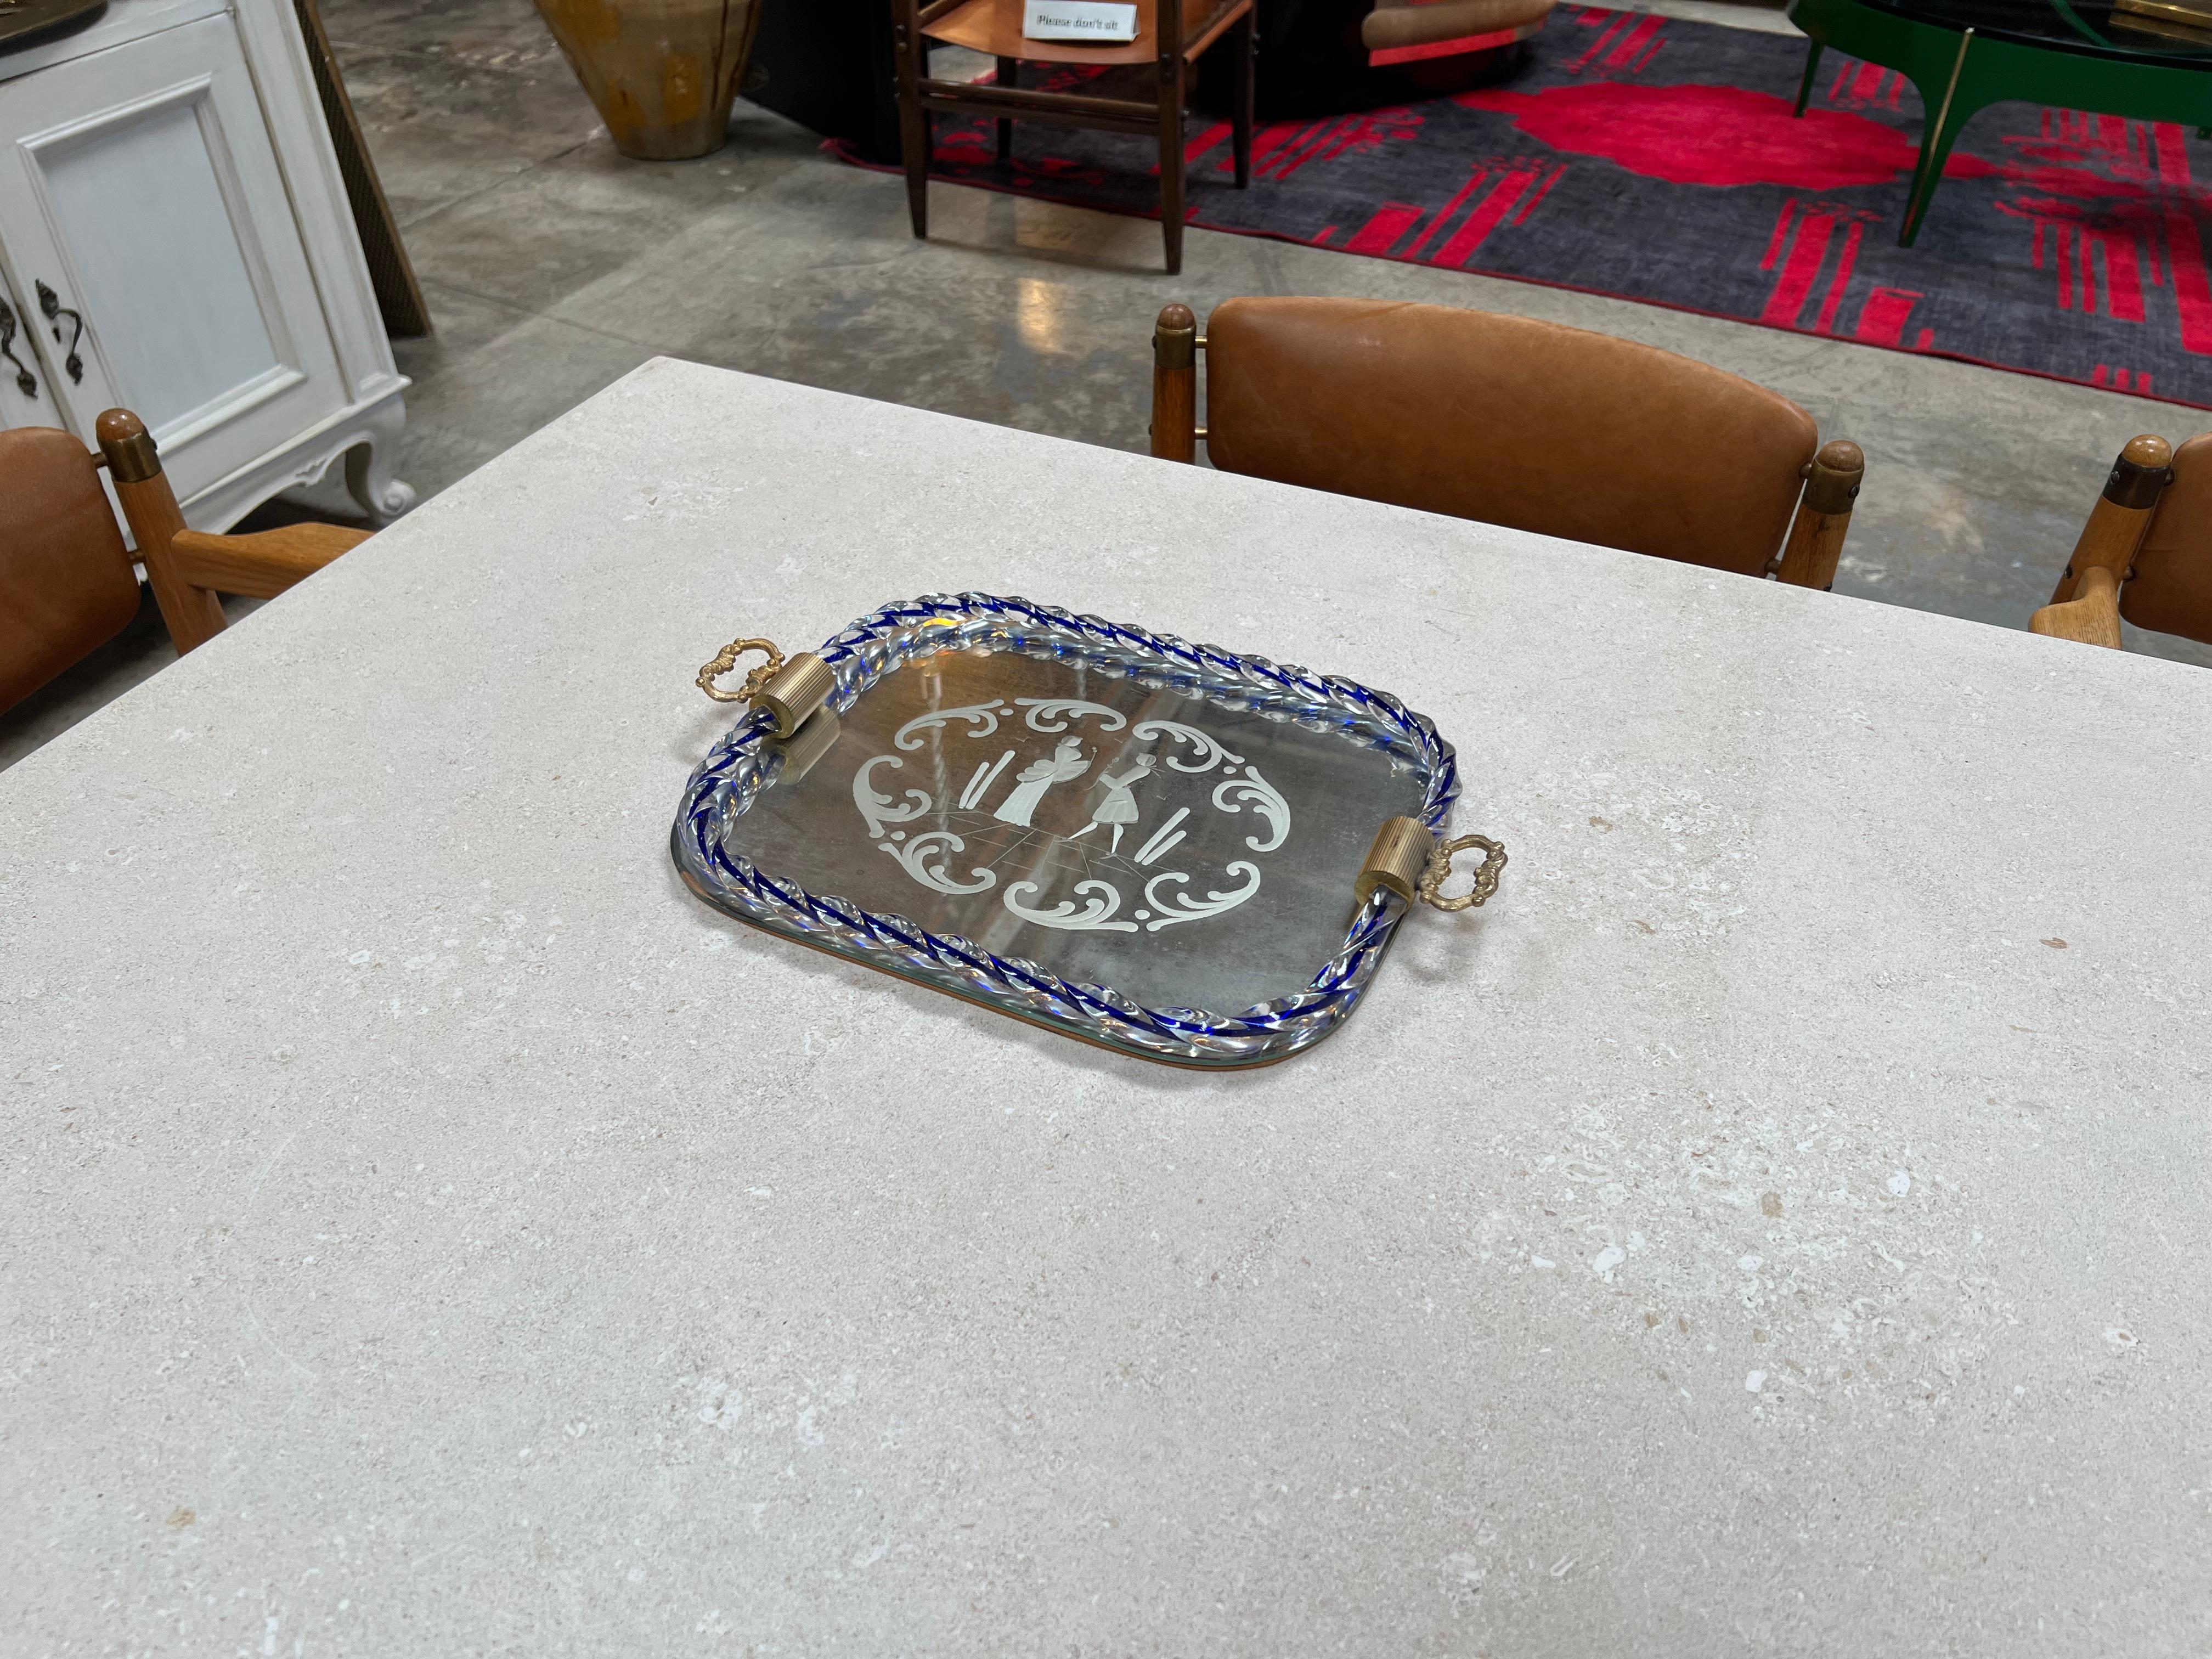 The Vintage Italian Decorative Murano and Mirror Tray from the 1950s is a captivating piece that marries the renowned Murano glass artistry with the functionality of a mirror tray. Originating from Italy, this tray showcases intricate Murano